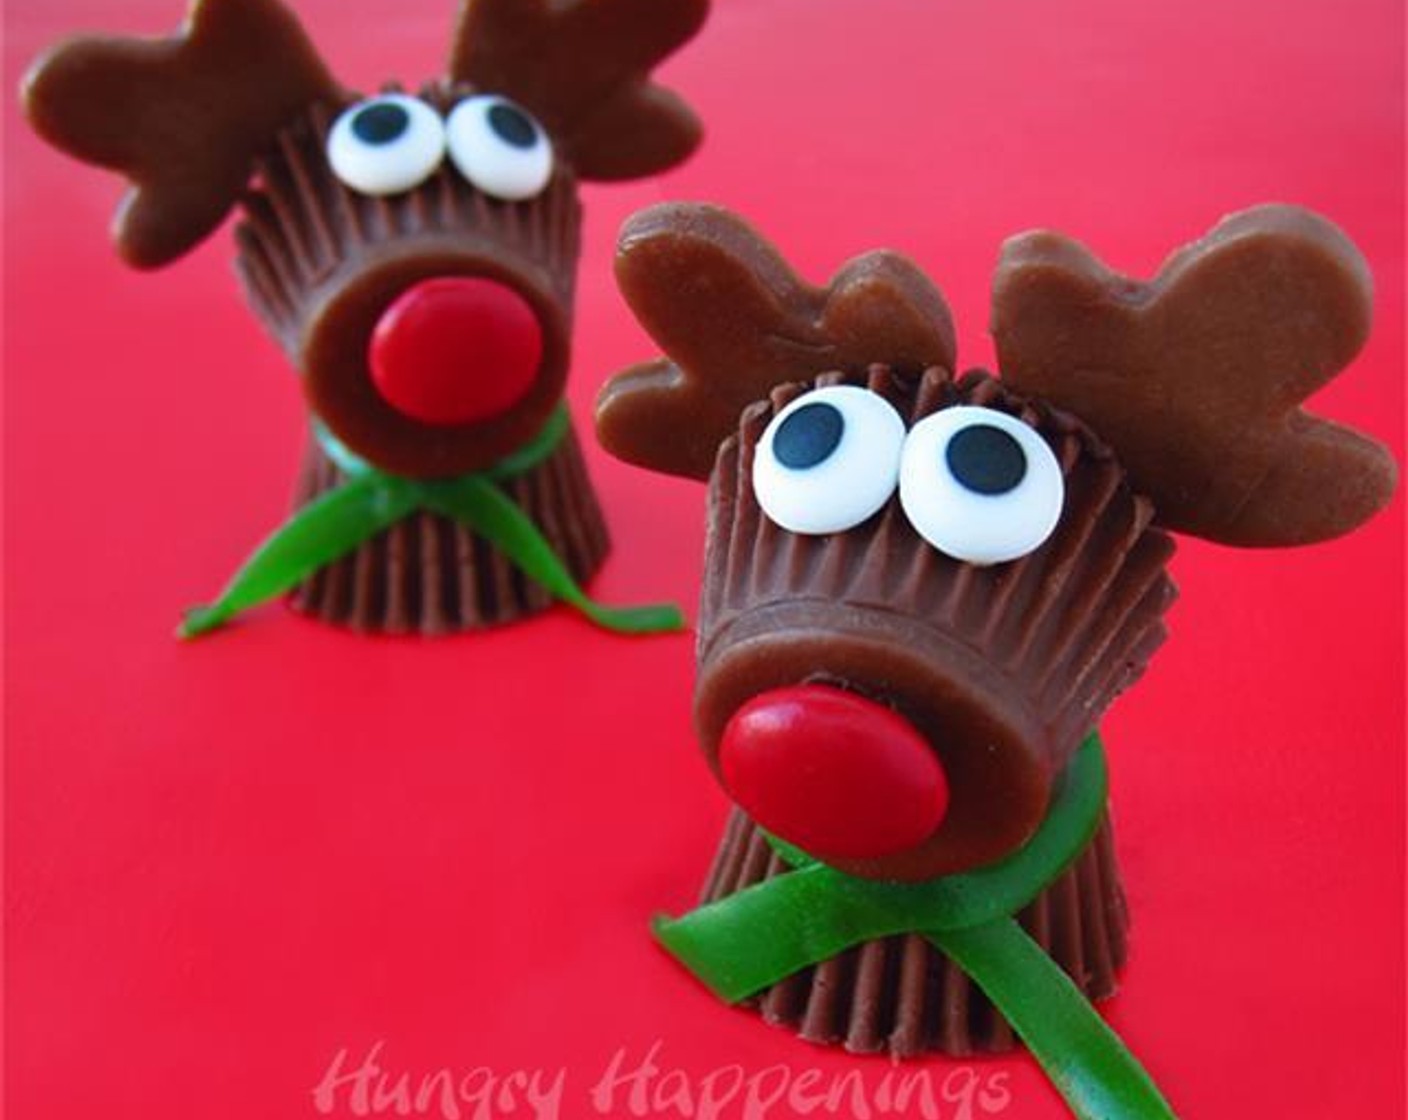 Reese's Cup Rudolph the Red Nose Reindeer Treats